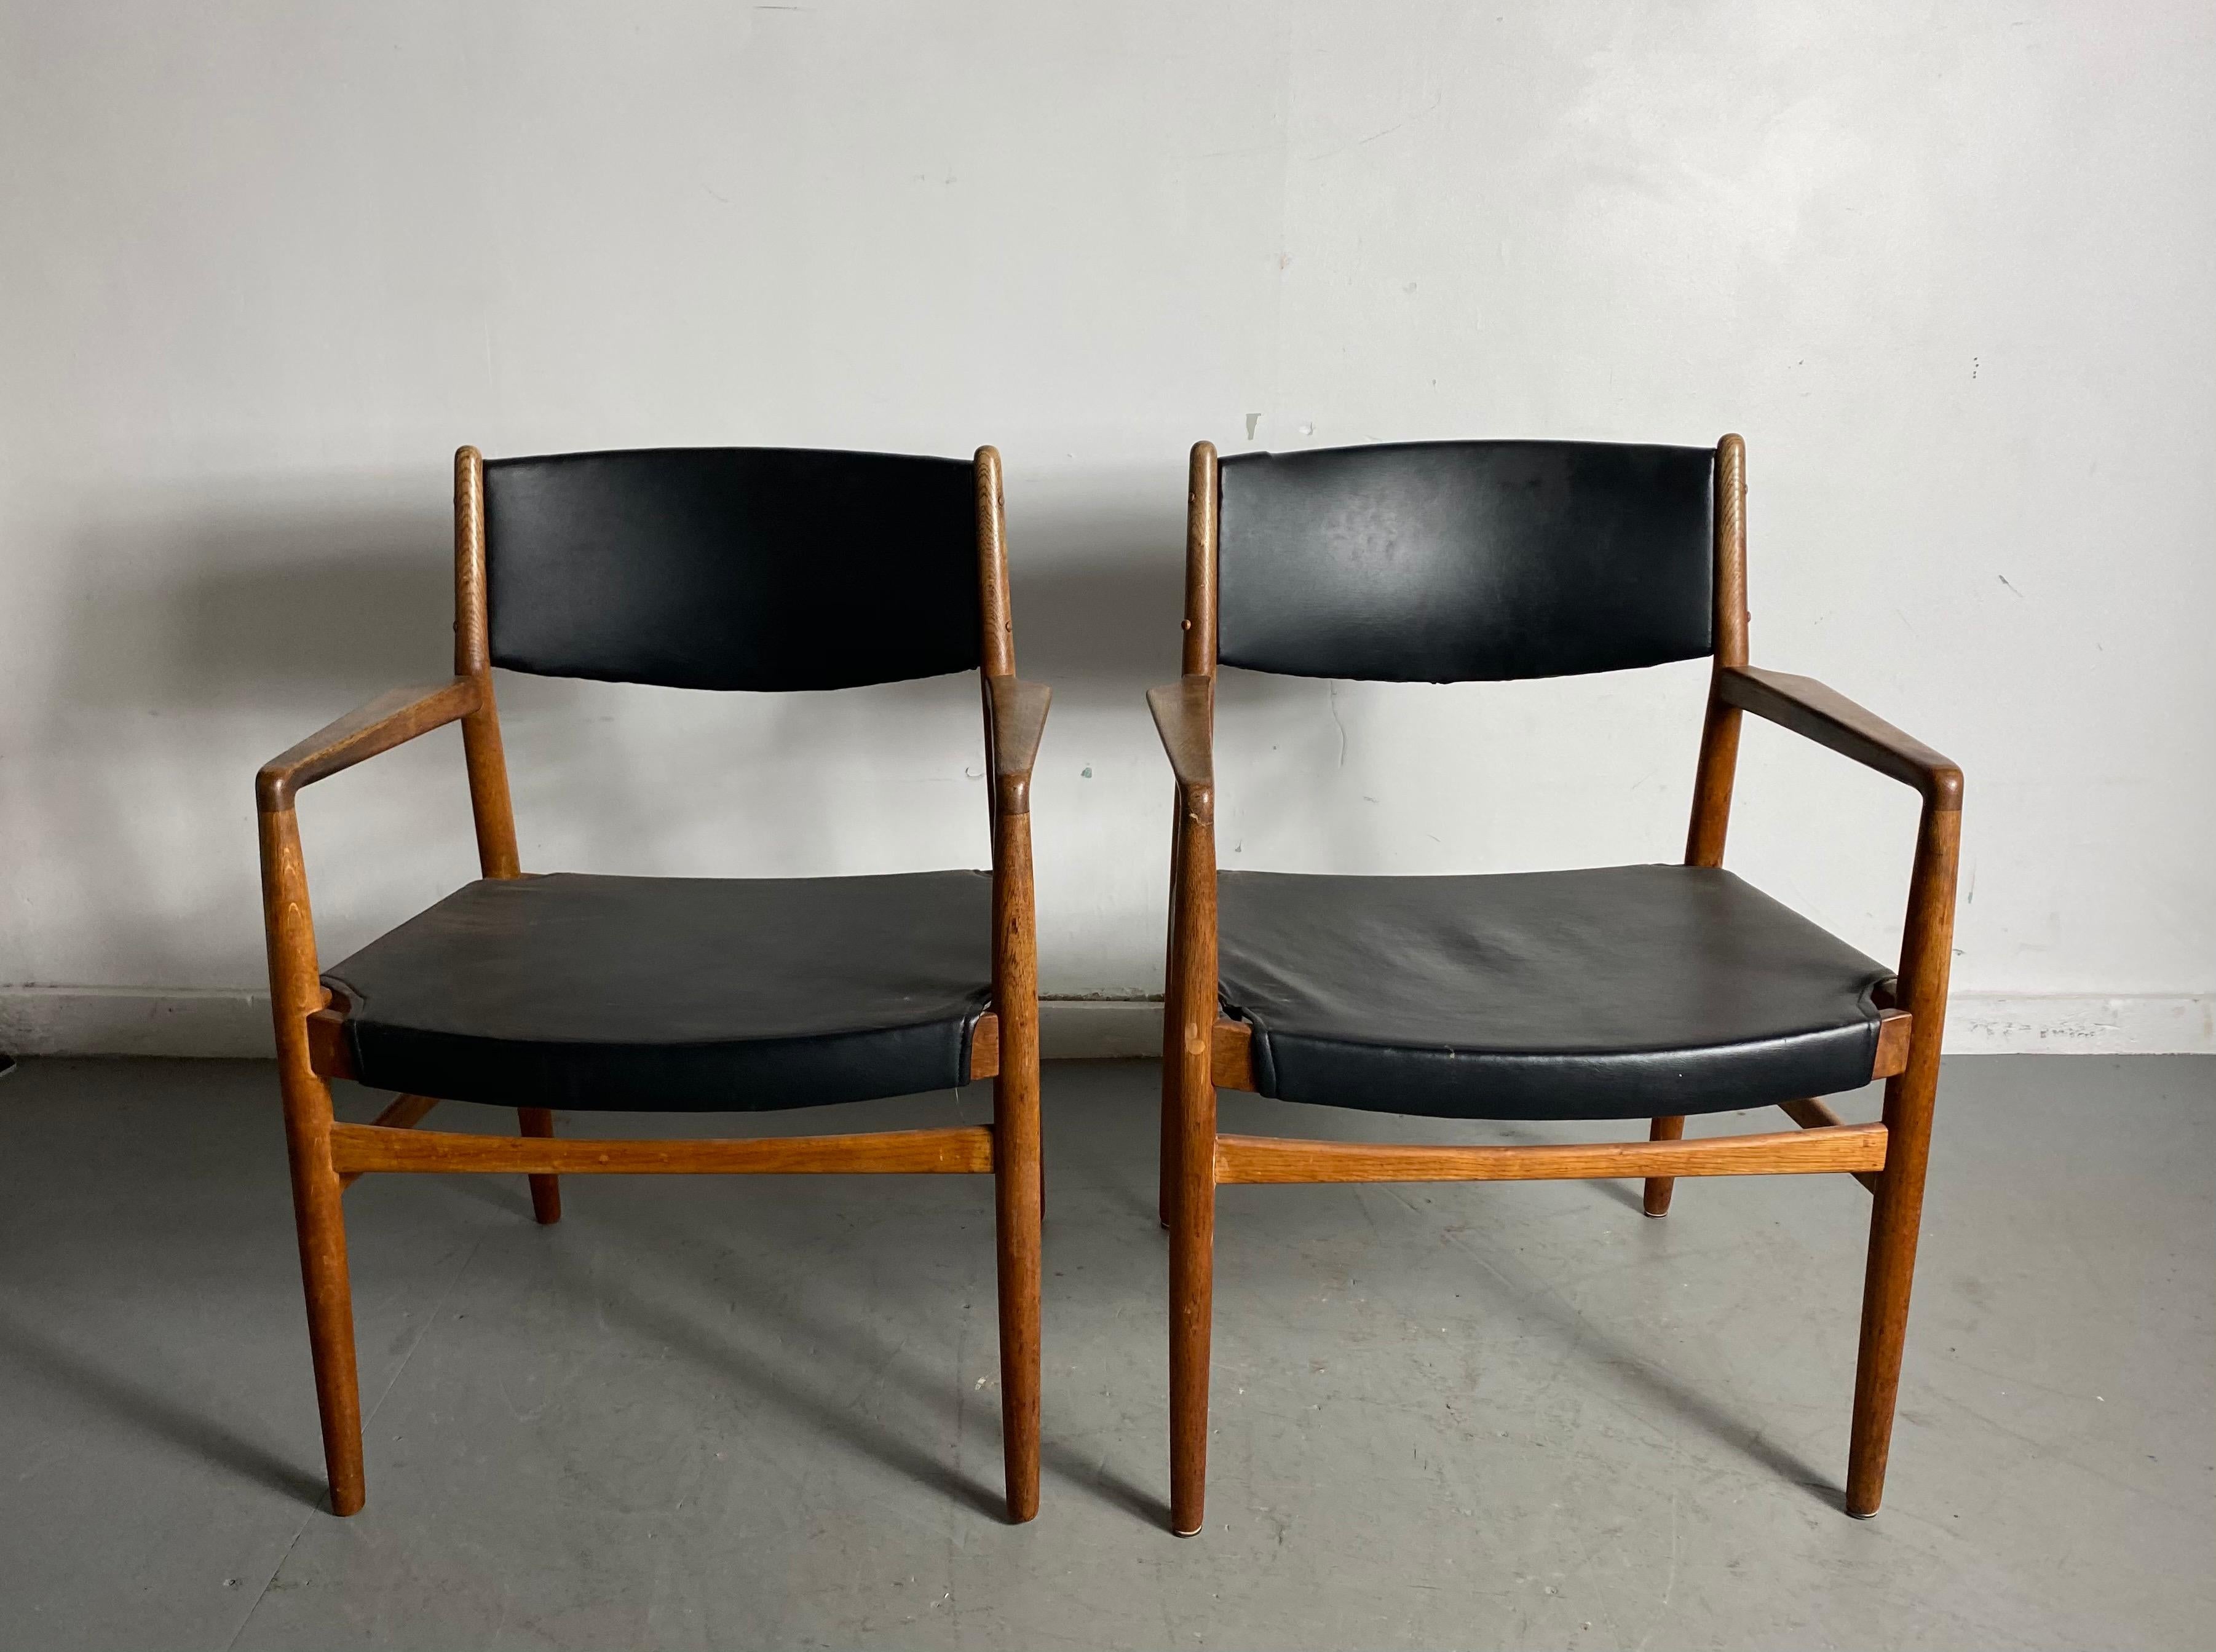 Classic Danish armchairs in solid oak by Knud Andersen, J.C.A. Jensen, Aarhus Denmark, nice original condition, retains original finish, patina, extremely comfortable, solid, sturdy construction.